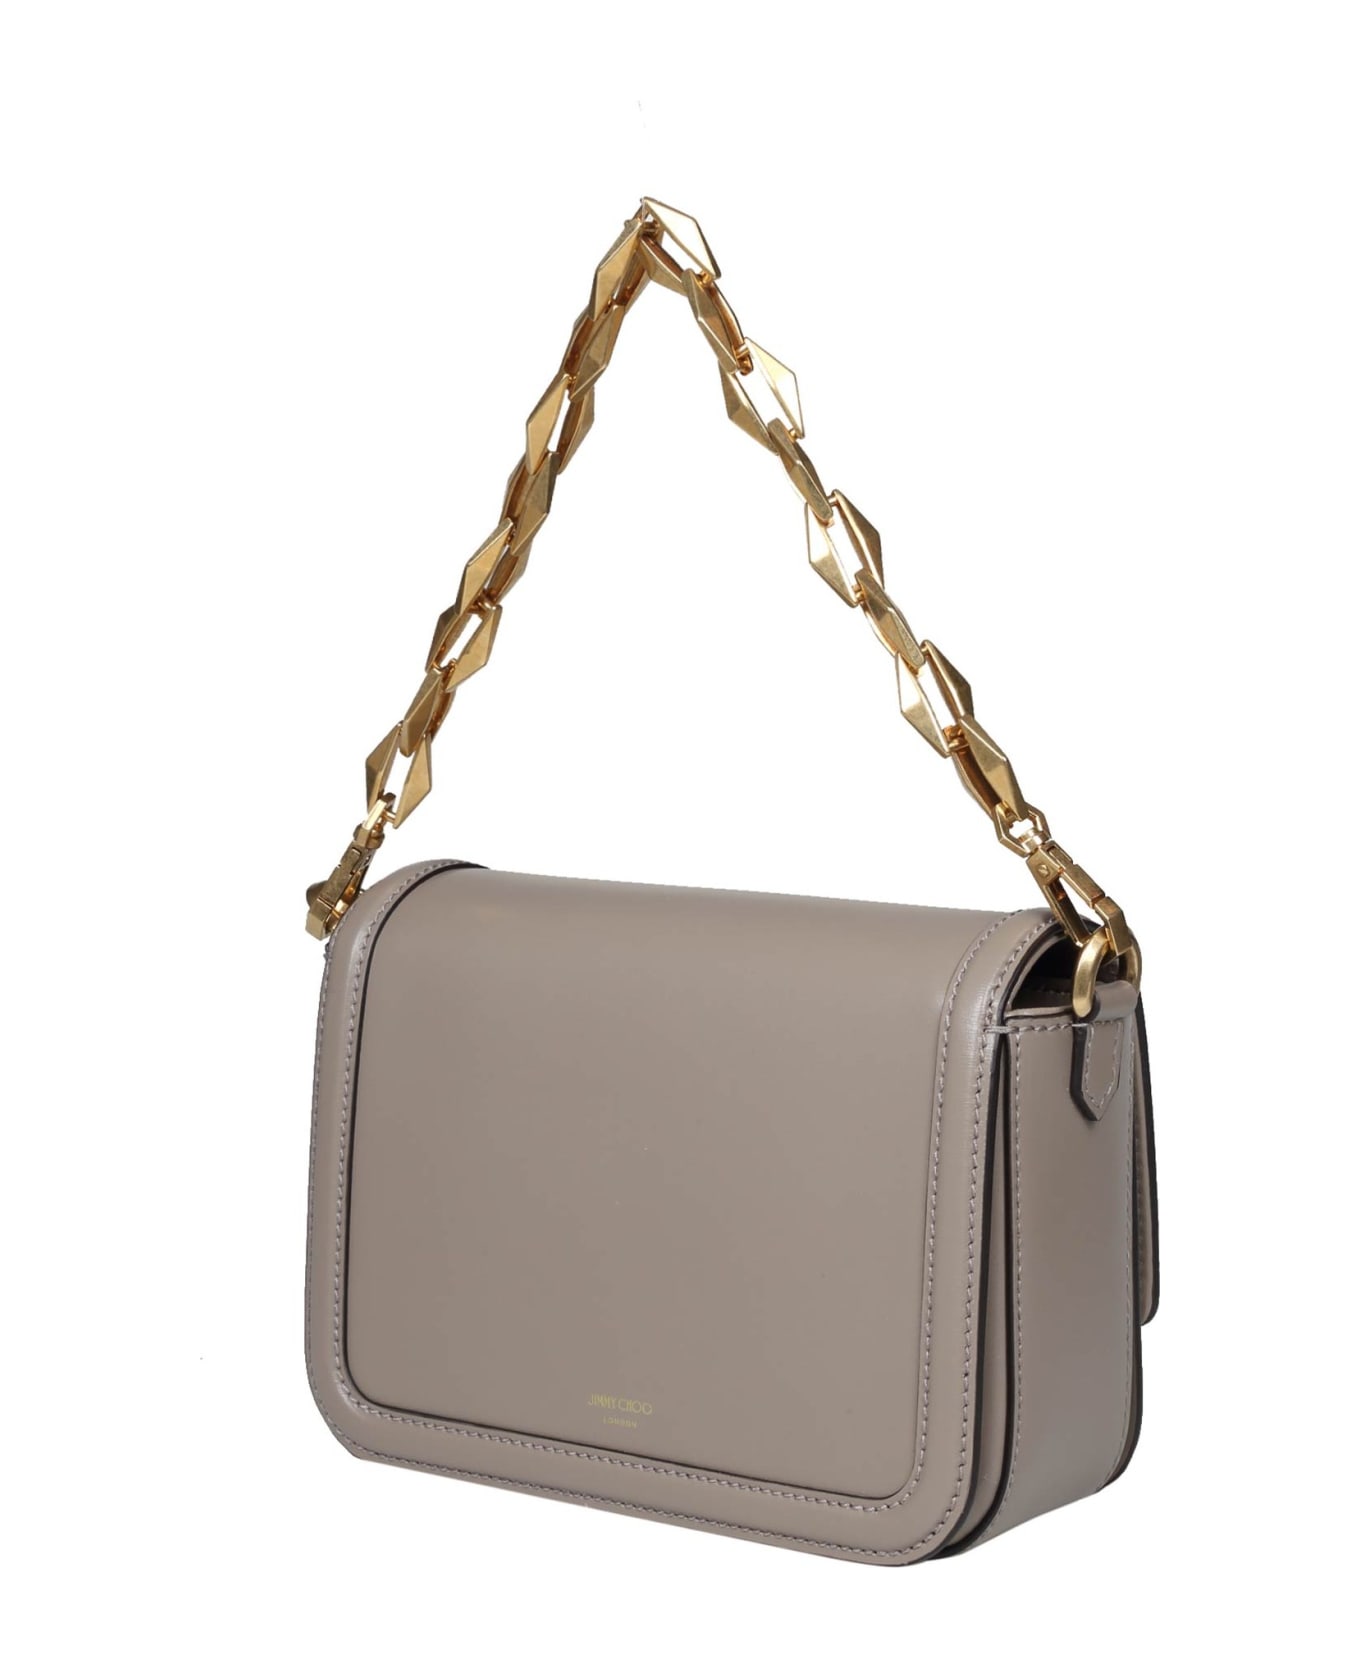 Jimmy Choo Diamond Crossbody Bag In Taupe Color Leather - Taupe ショルダーバッグ